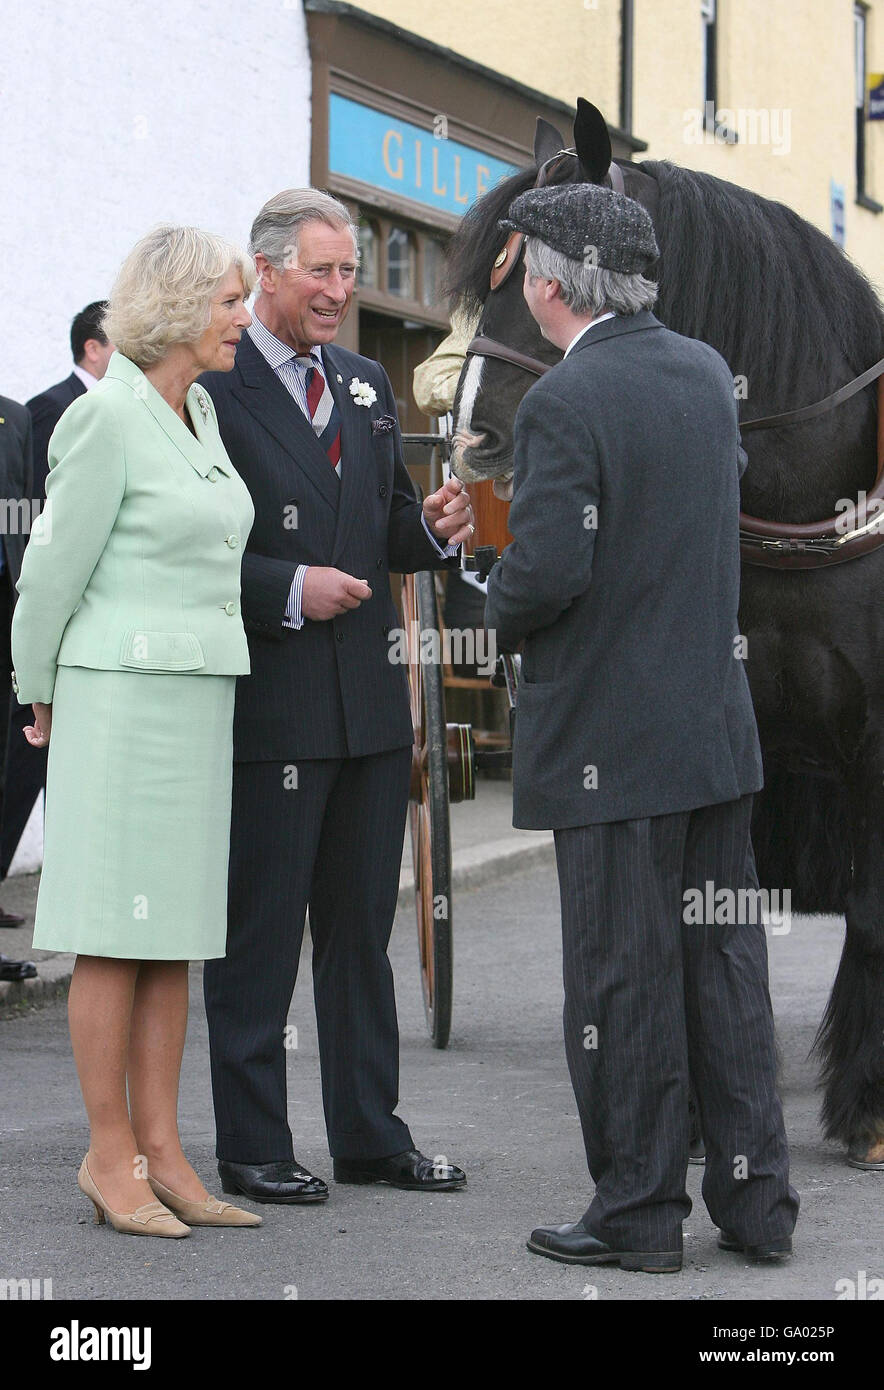 The Prince of Wales and the Duchess of Cornwall talk with a man in period costume tending a horse at the Ulster Folk and Transport Musuem. Stock Photo